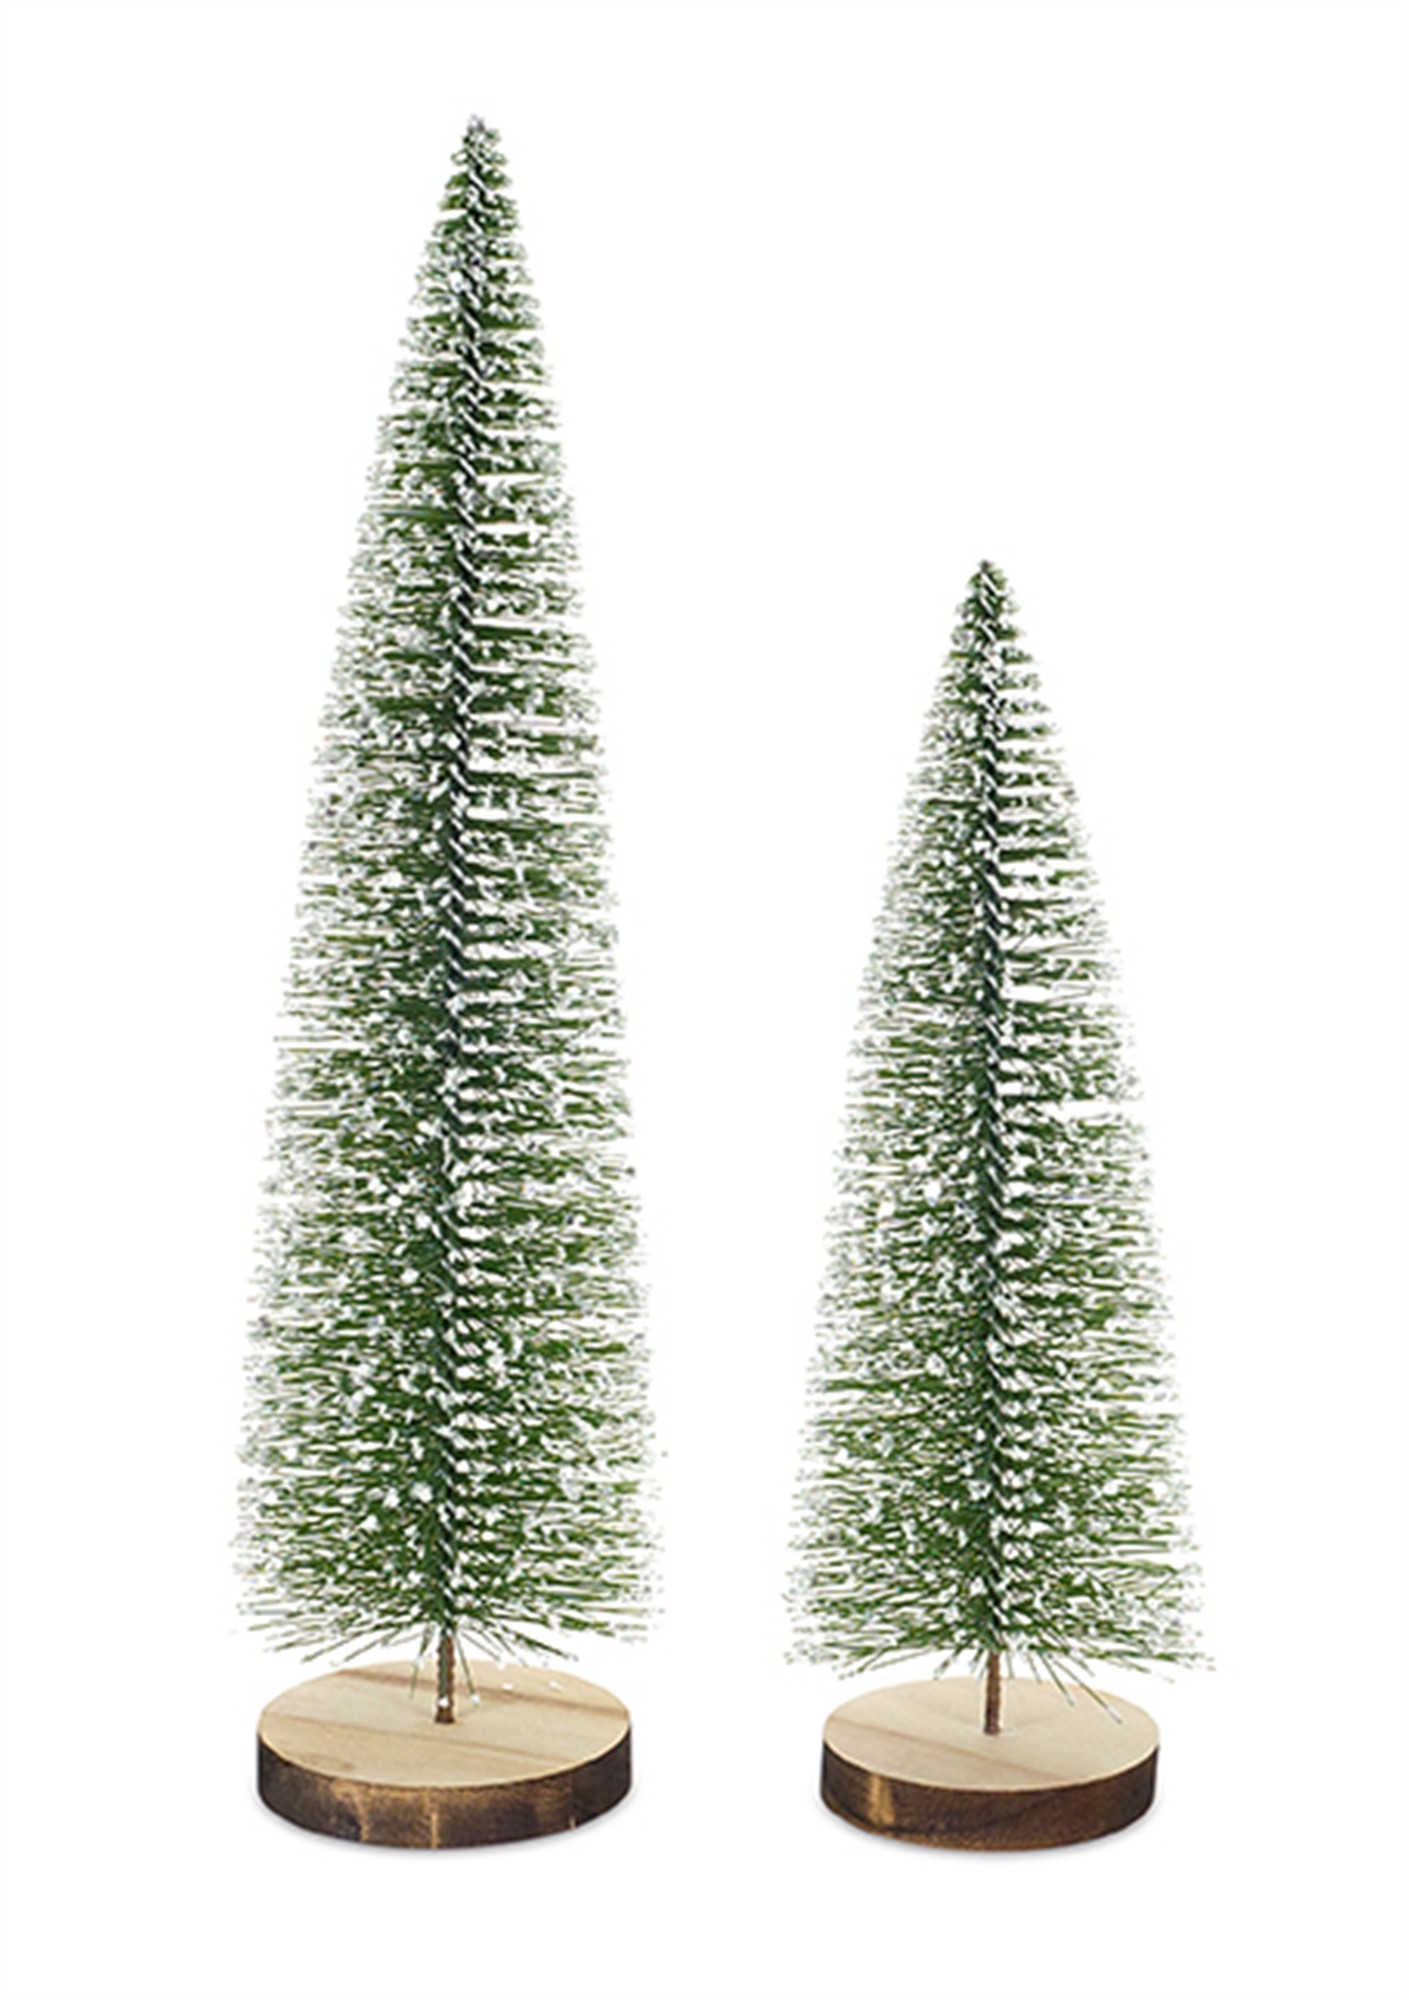 Tree with Ice (Set of 4) 12.75"H, 16.5"H Plastic